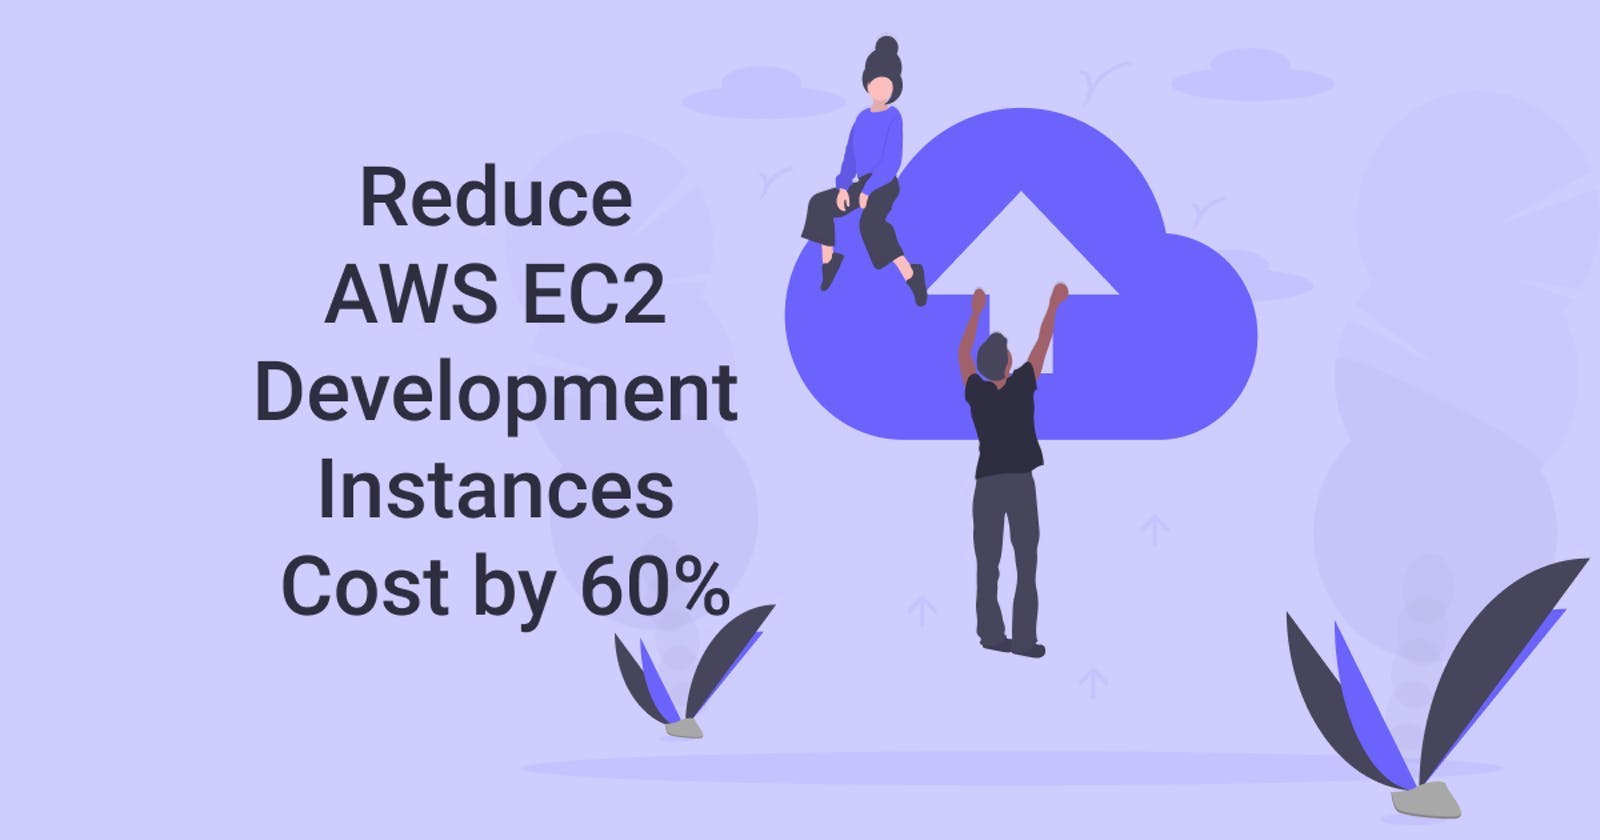 How to Reduce AWS EC2 Development Instances Cost by 60%